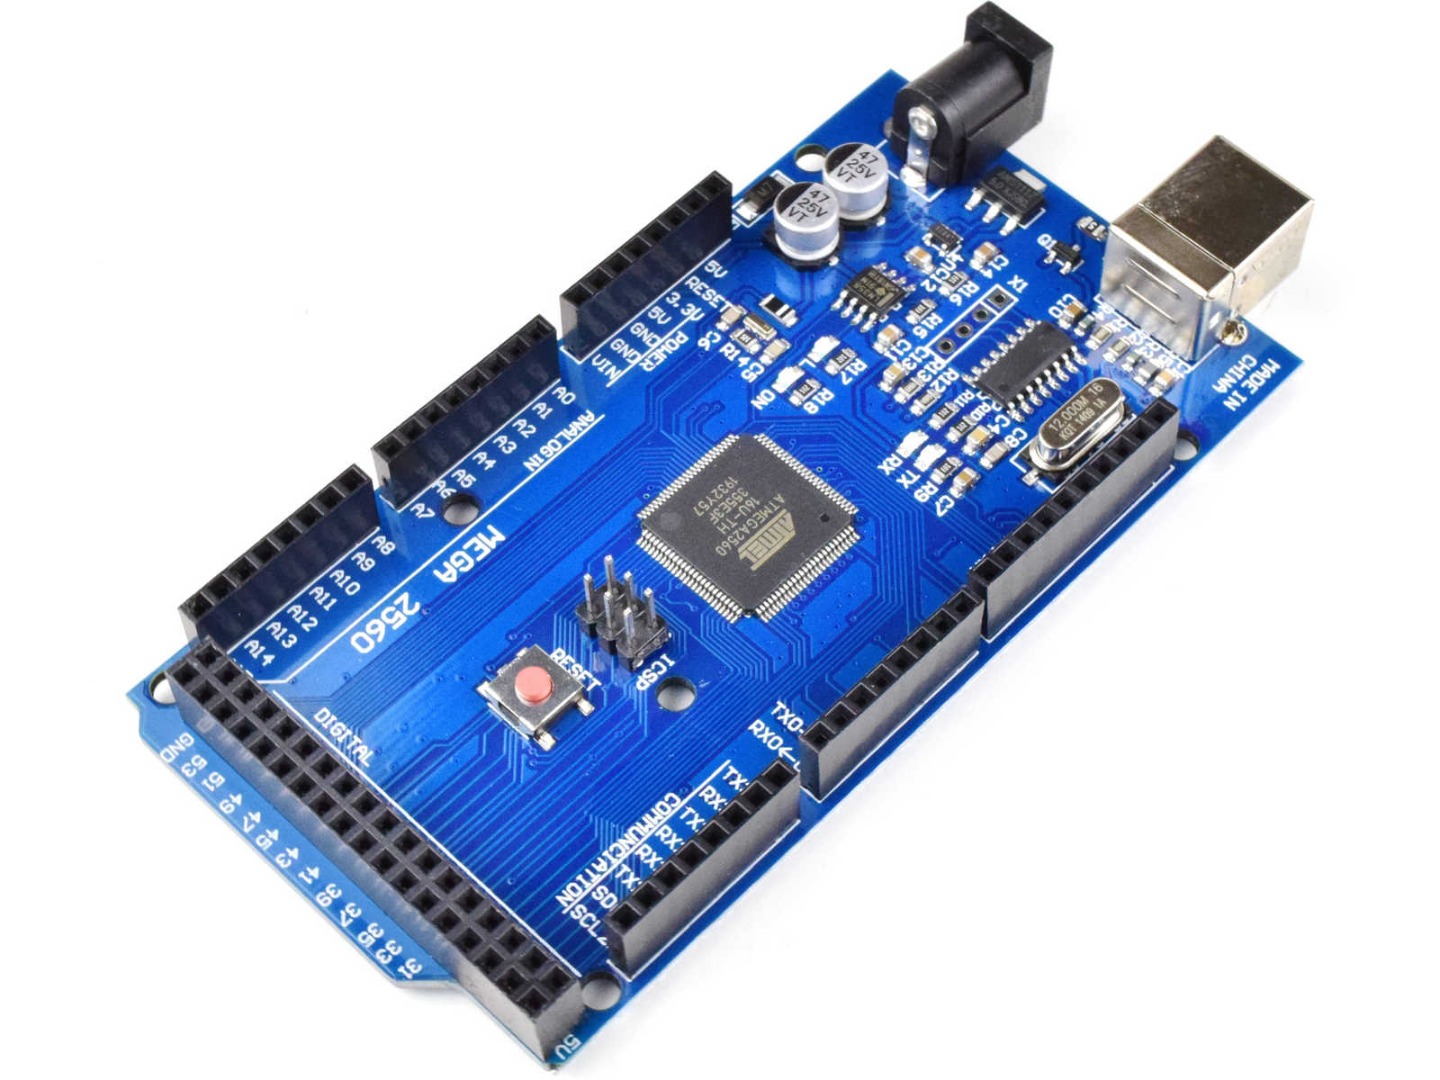 MEGA 2560 R3 module with Atmega2560 + CH340 USB (100% compatible with Arduino) 5